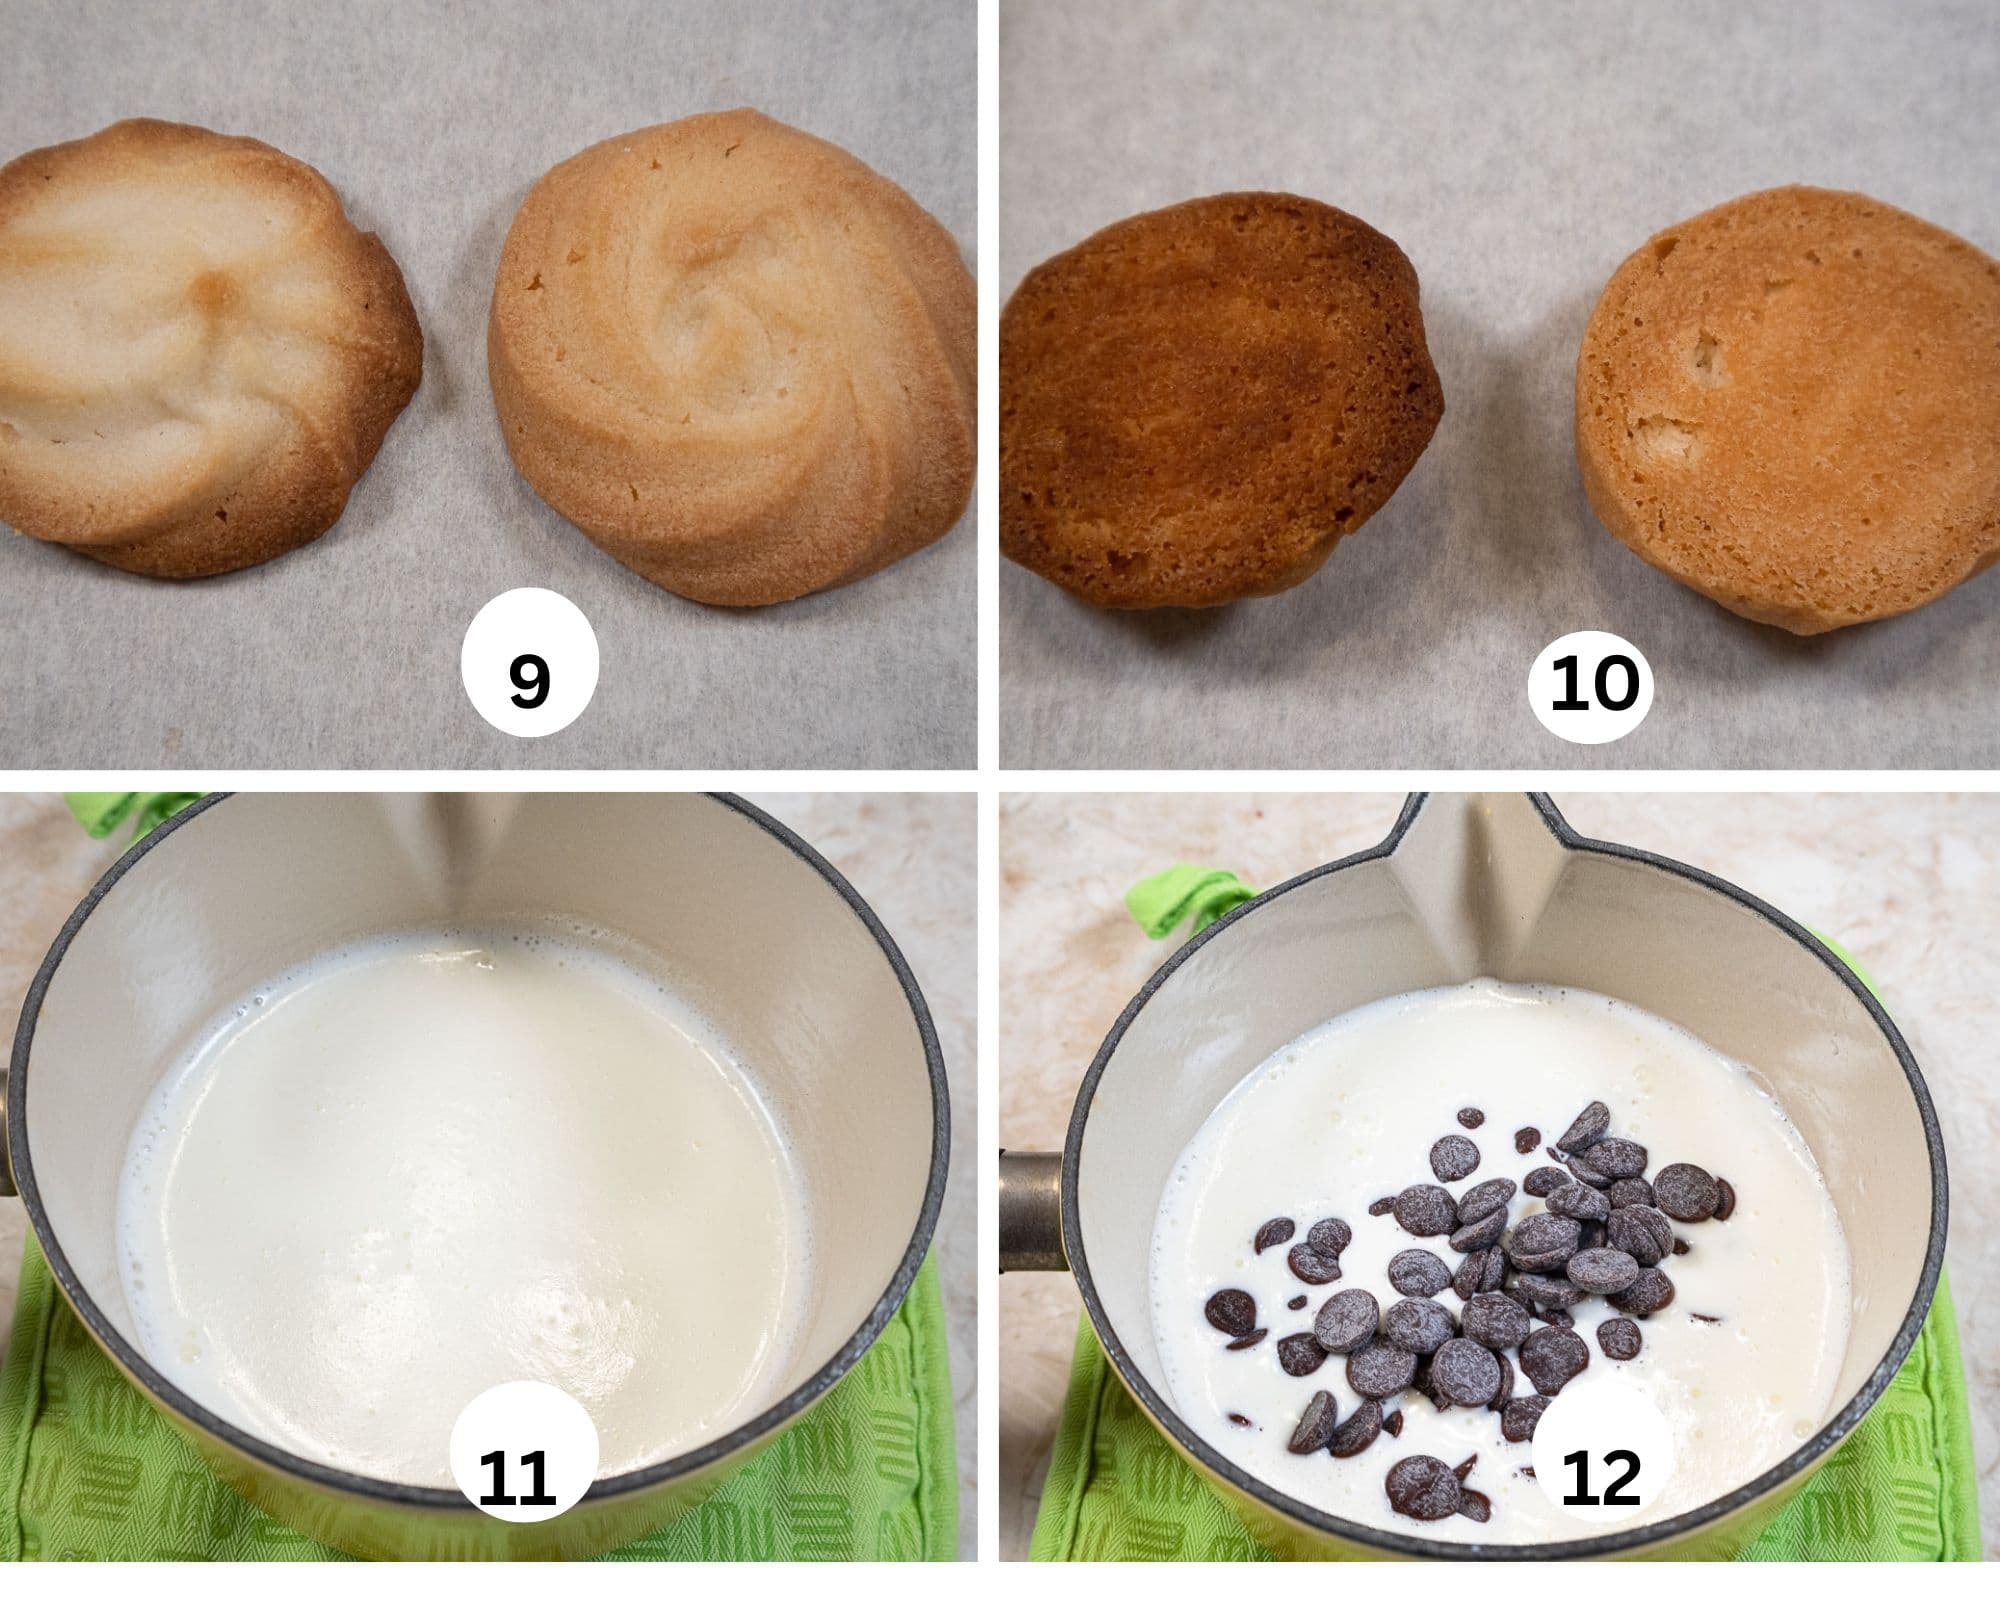 The third collages shows the tops of two cookies, one baked on a single baking sheet, the other on a double pan, the bottoms of the cookies one dark, one lighter, cream heated and chocolate added to the hot cream.